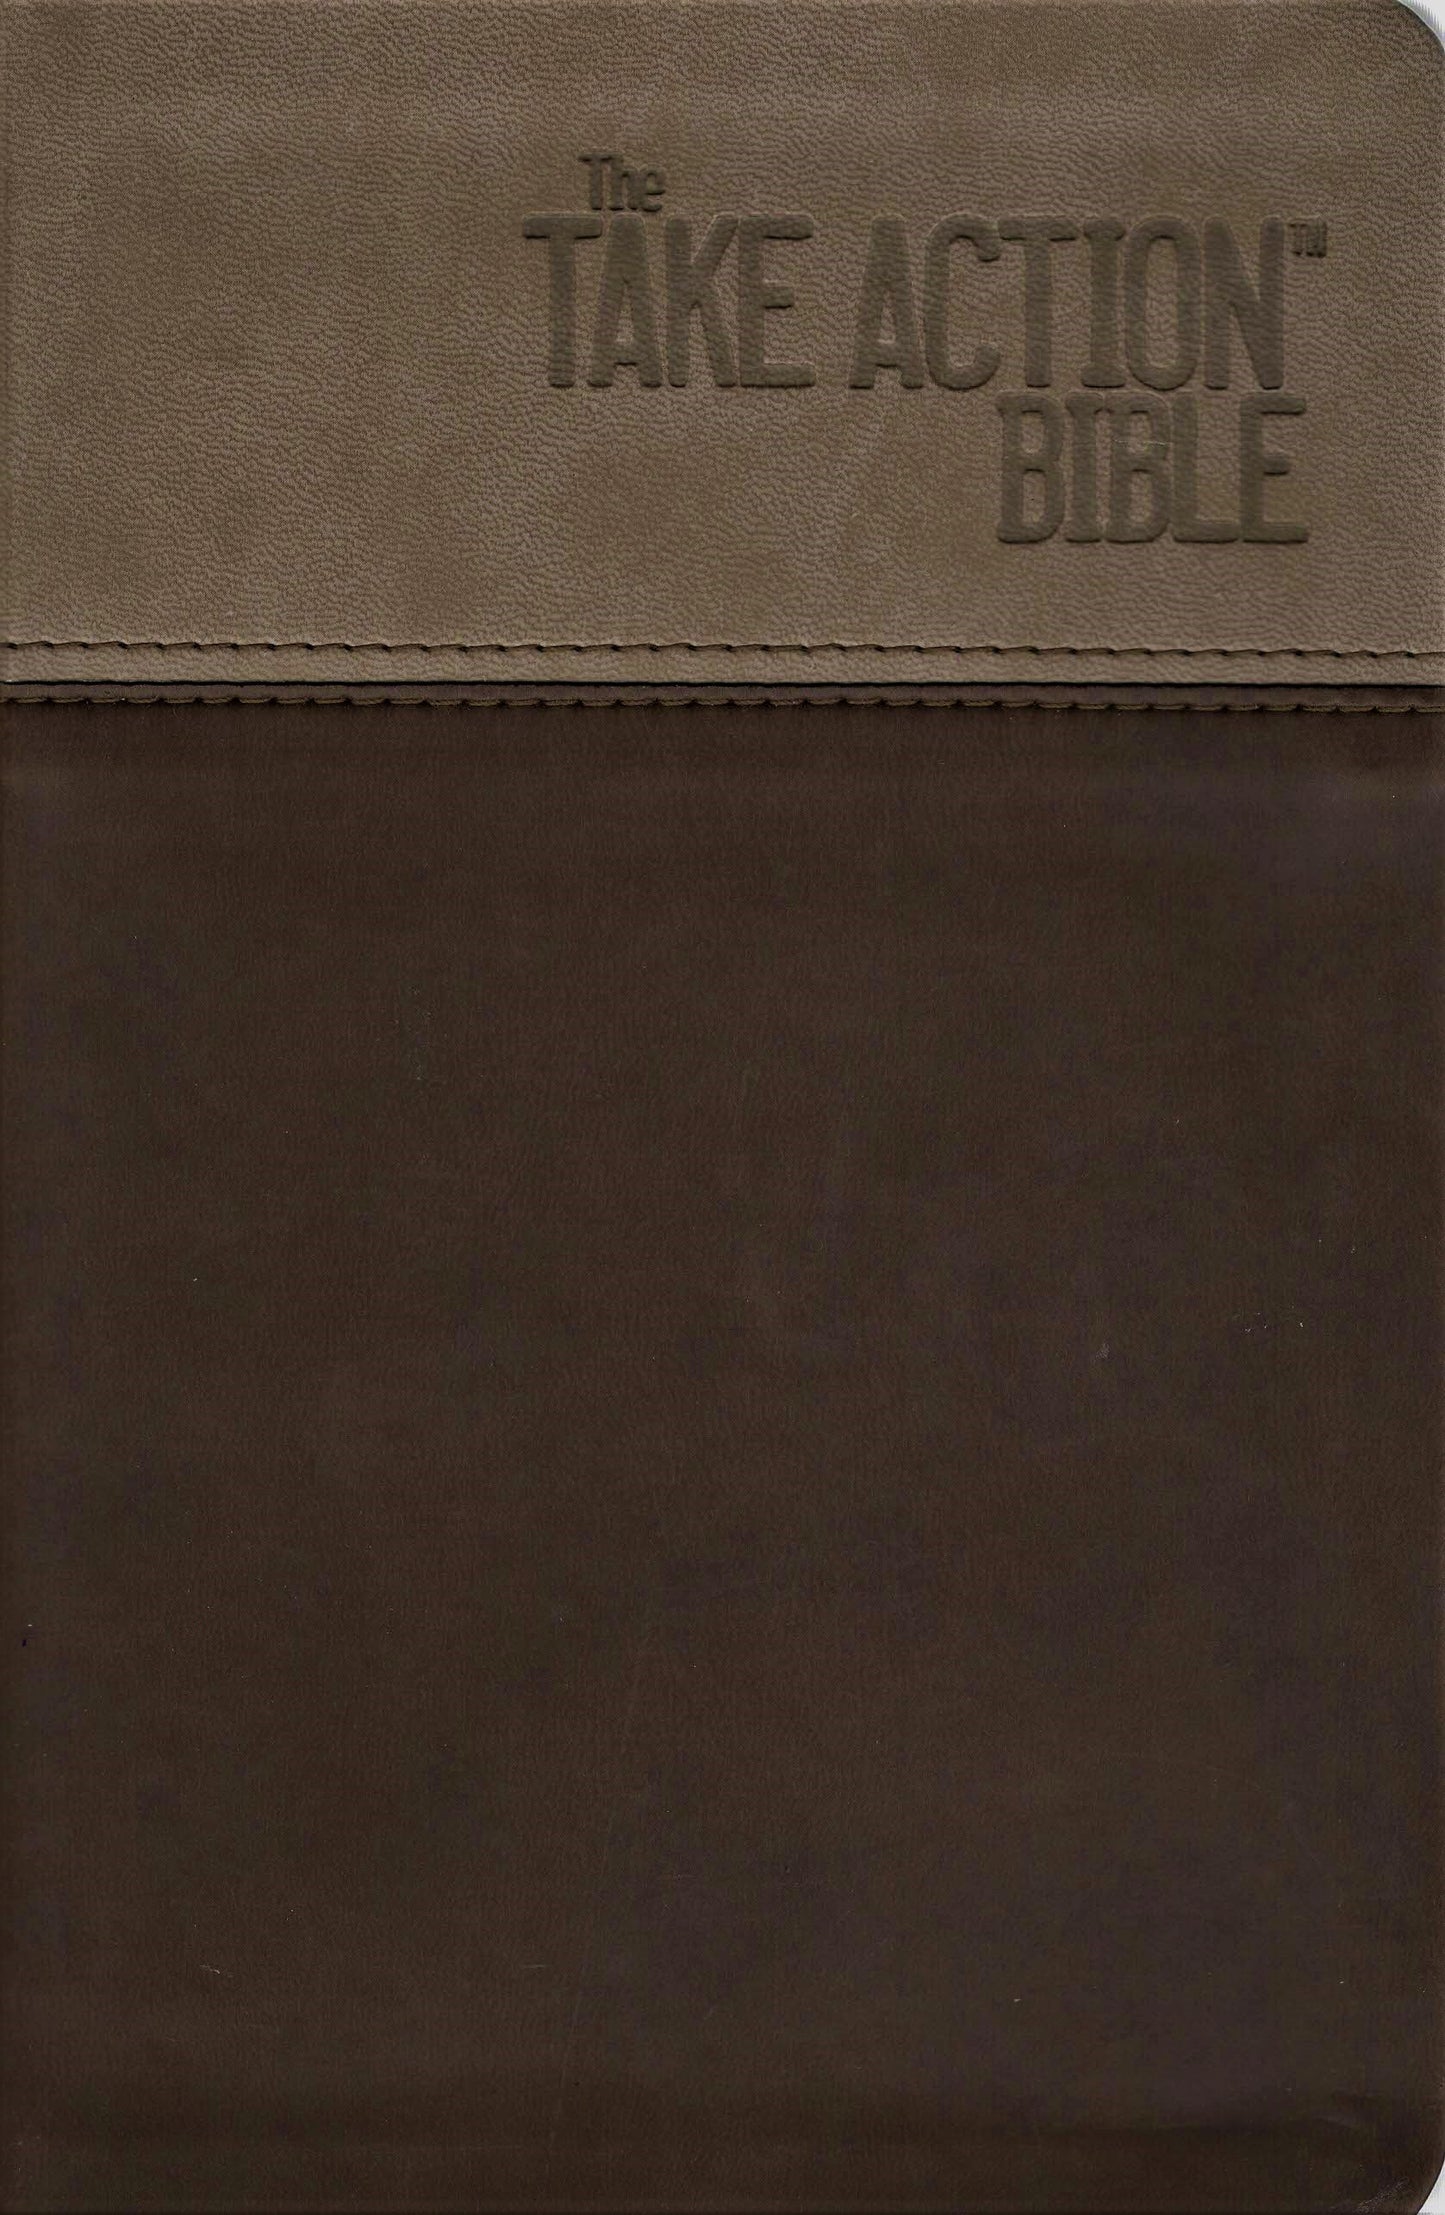 Thomas Nelson NKJV® The Take Action™ Bible - Leathersoft™ (Copper/Earth Brown/Mink)